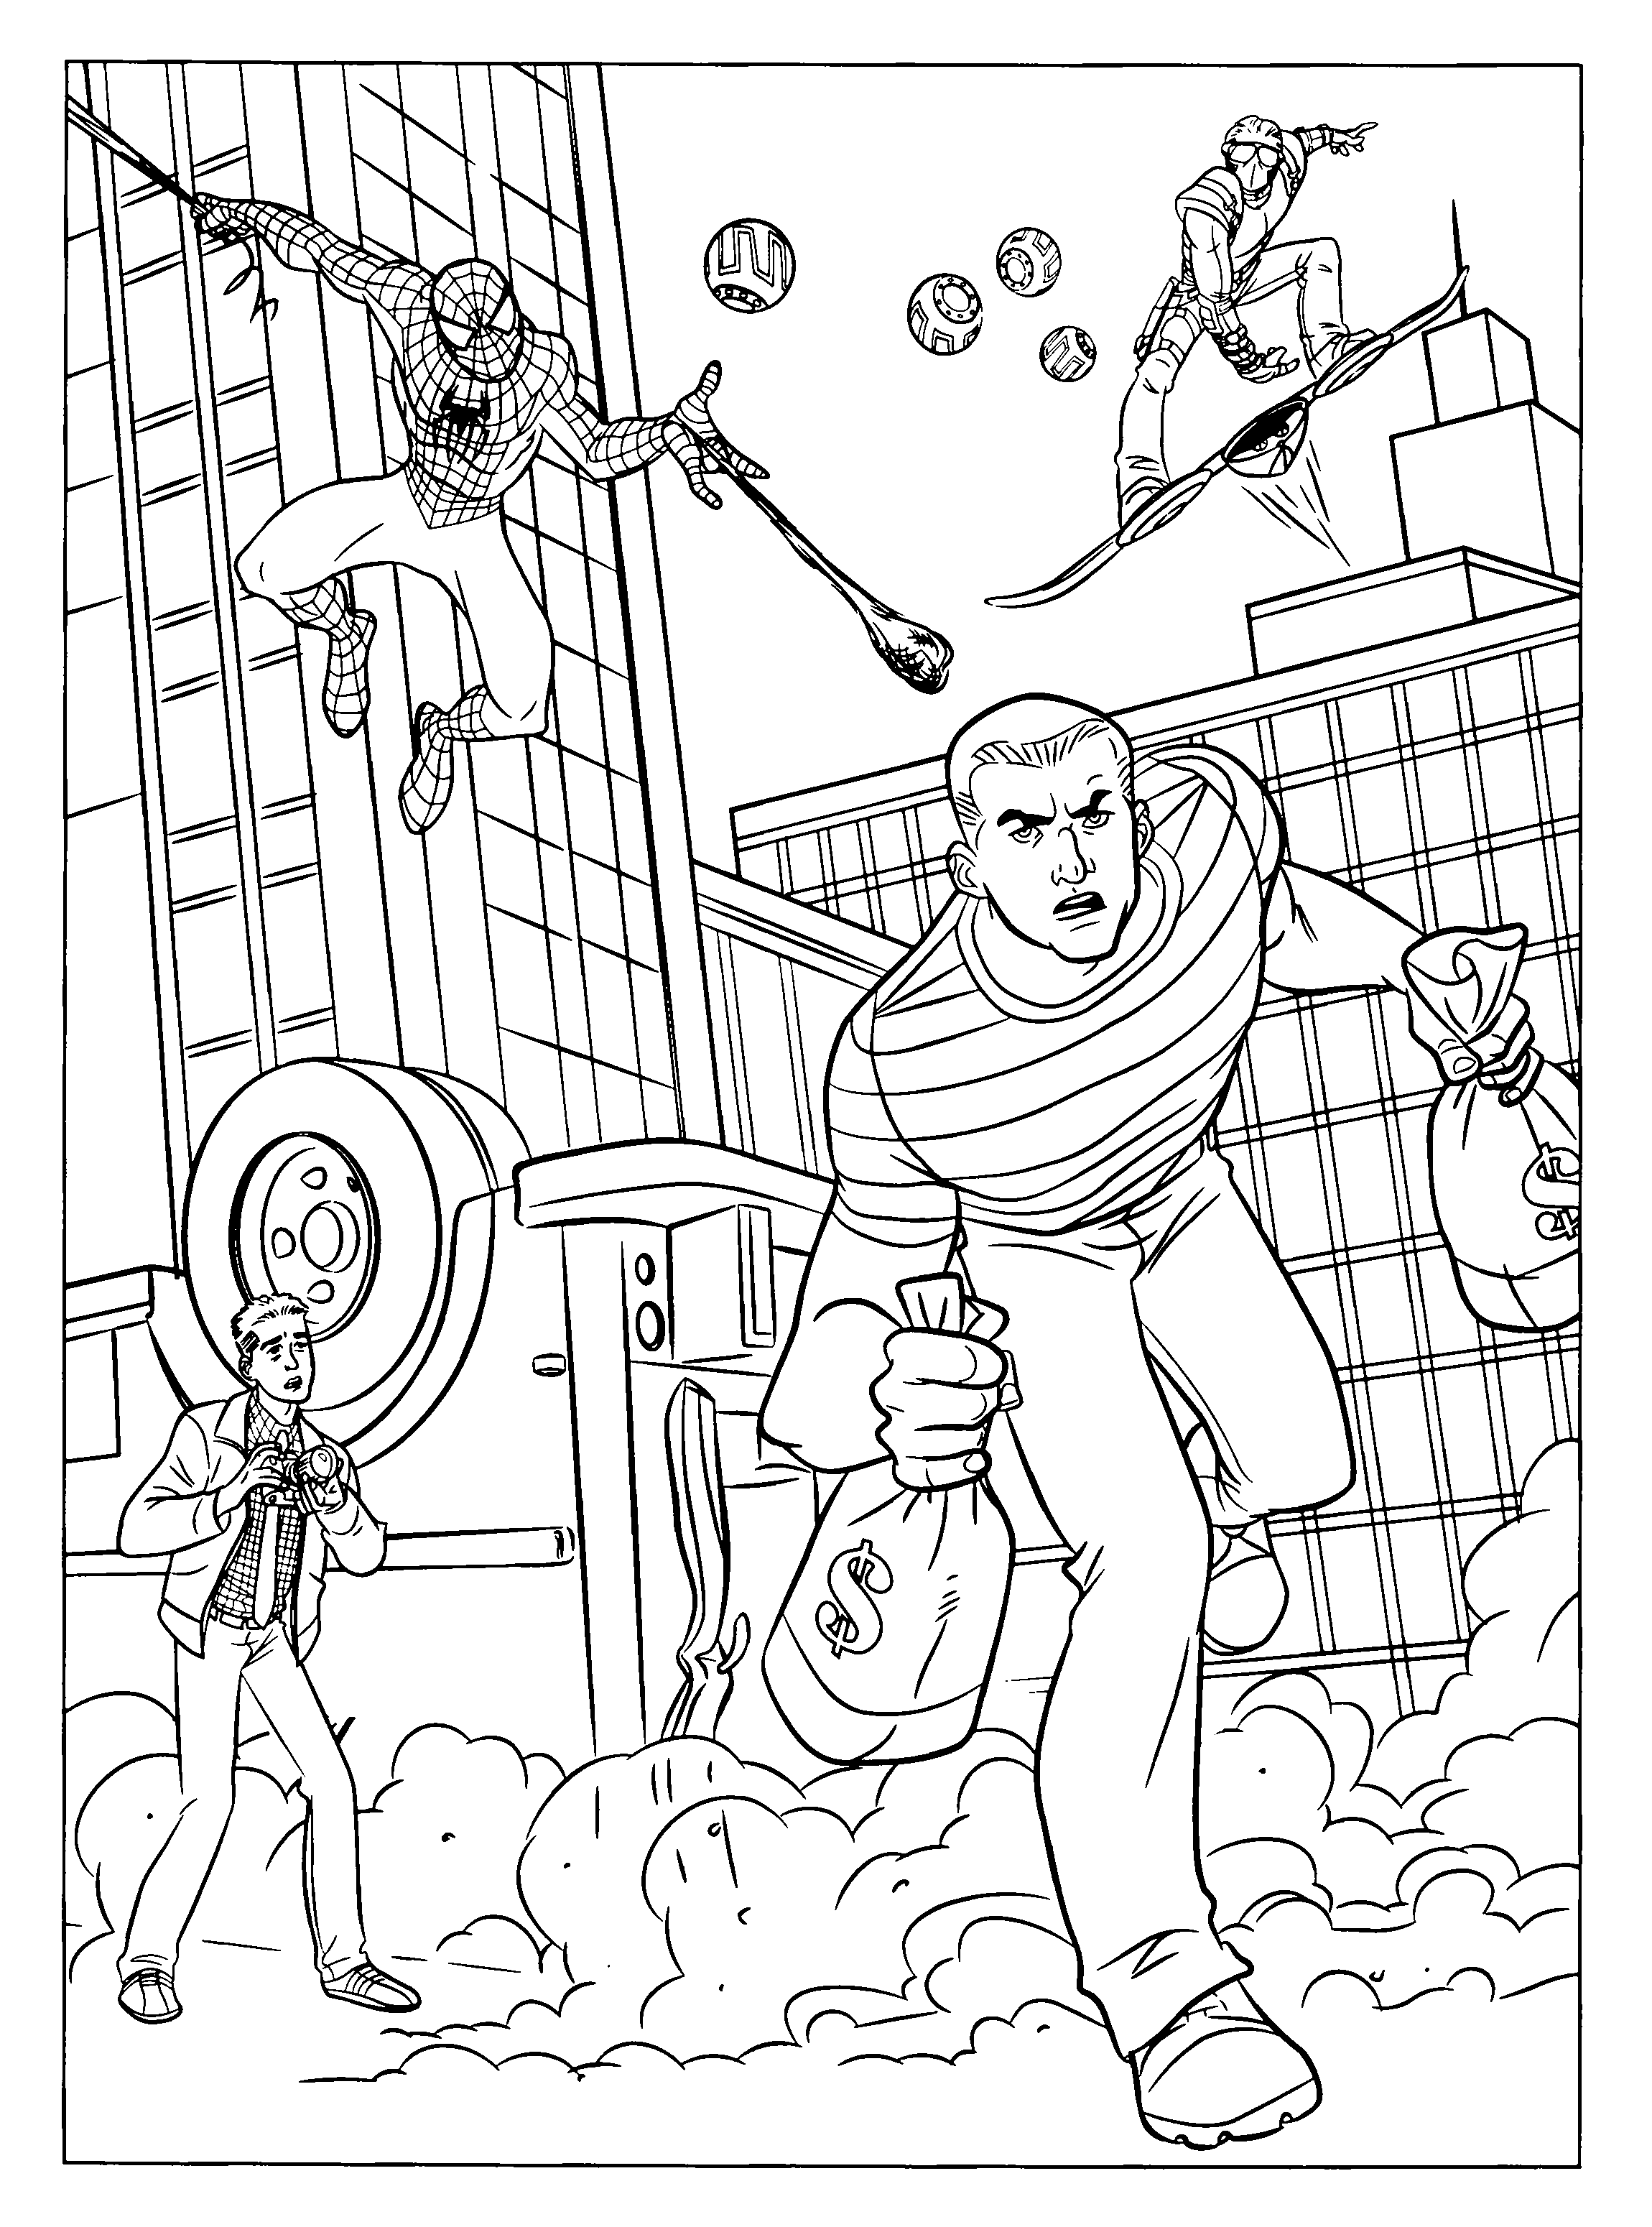 Spiderman Coloring pages | Kids coloring pages | Free coloring pages | #17